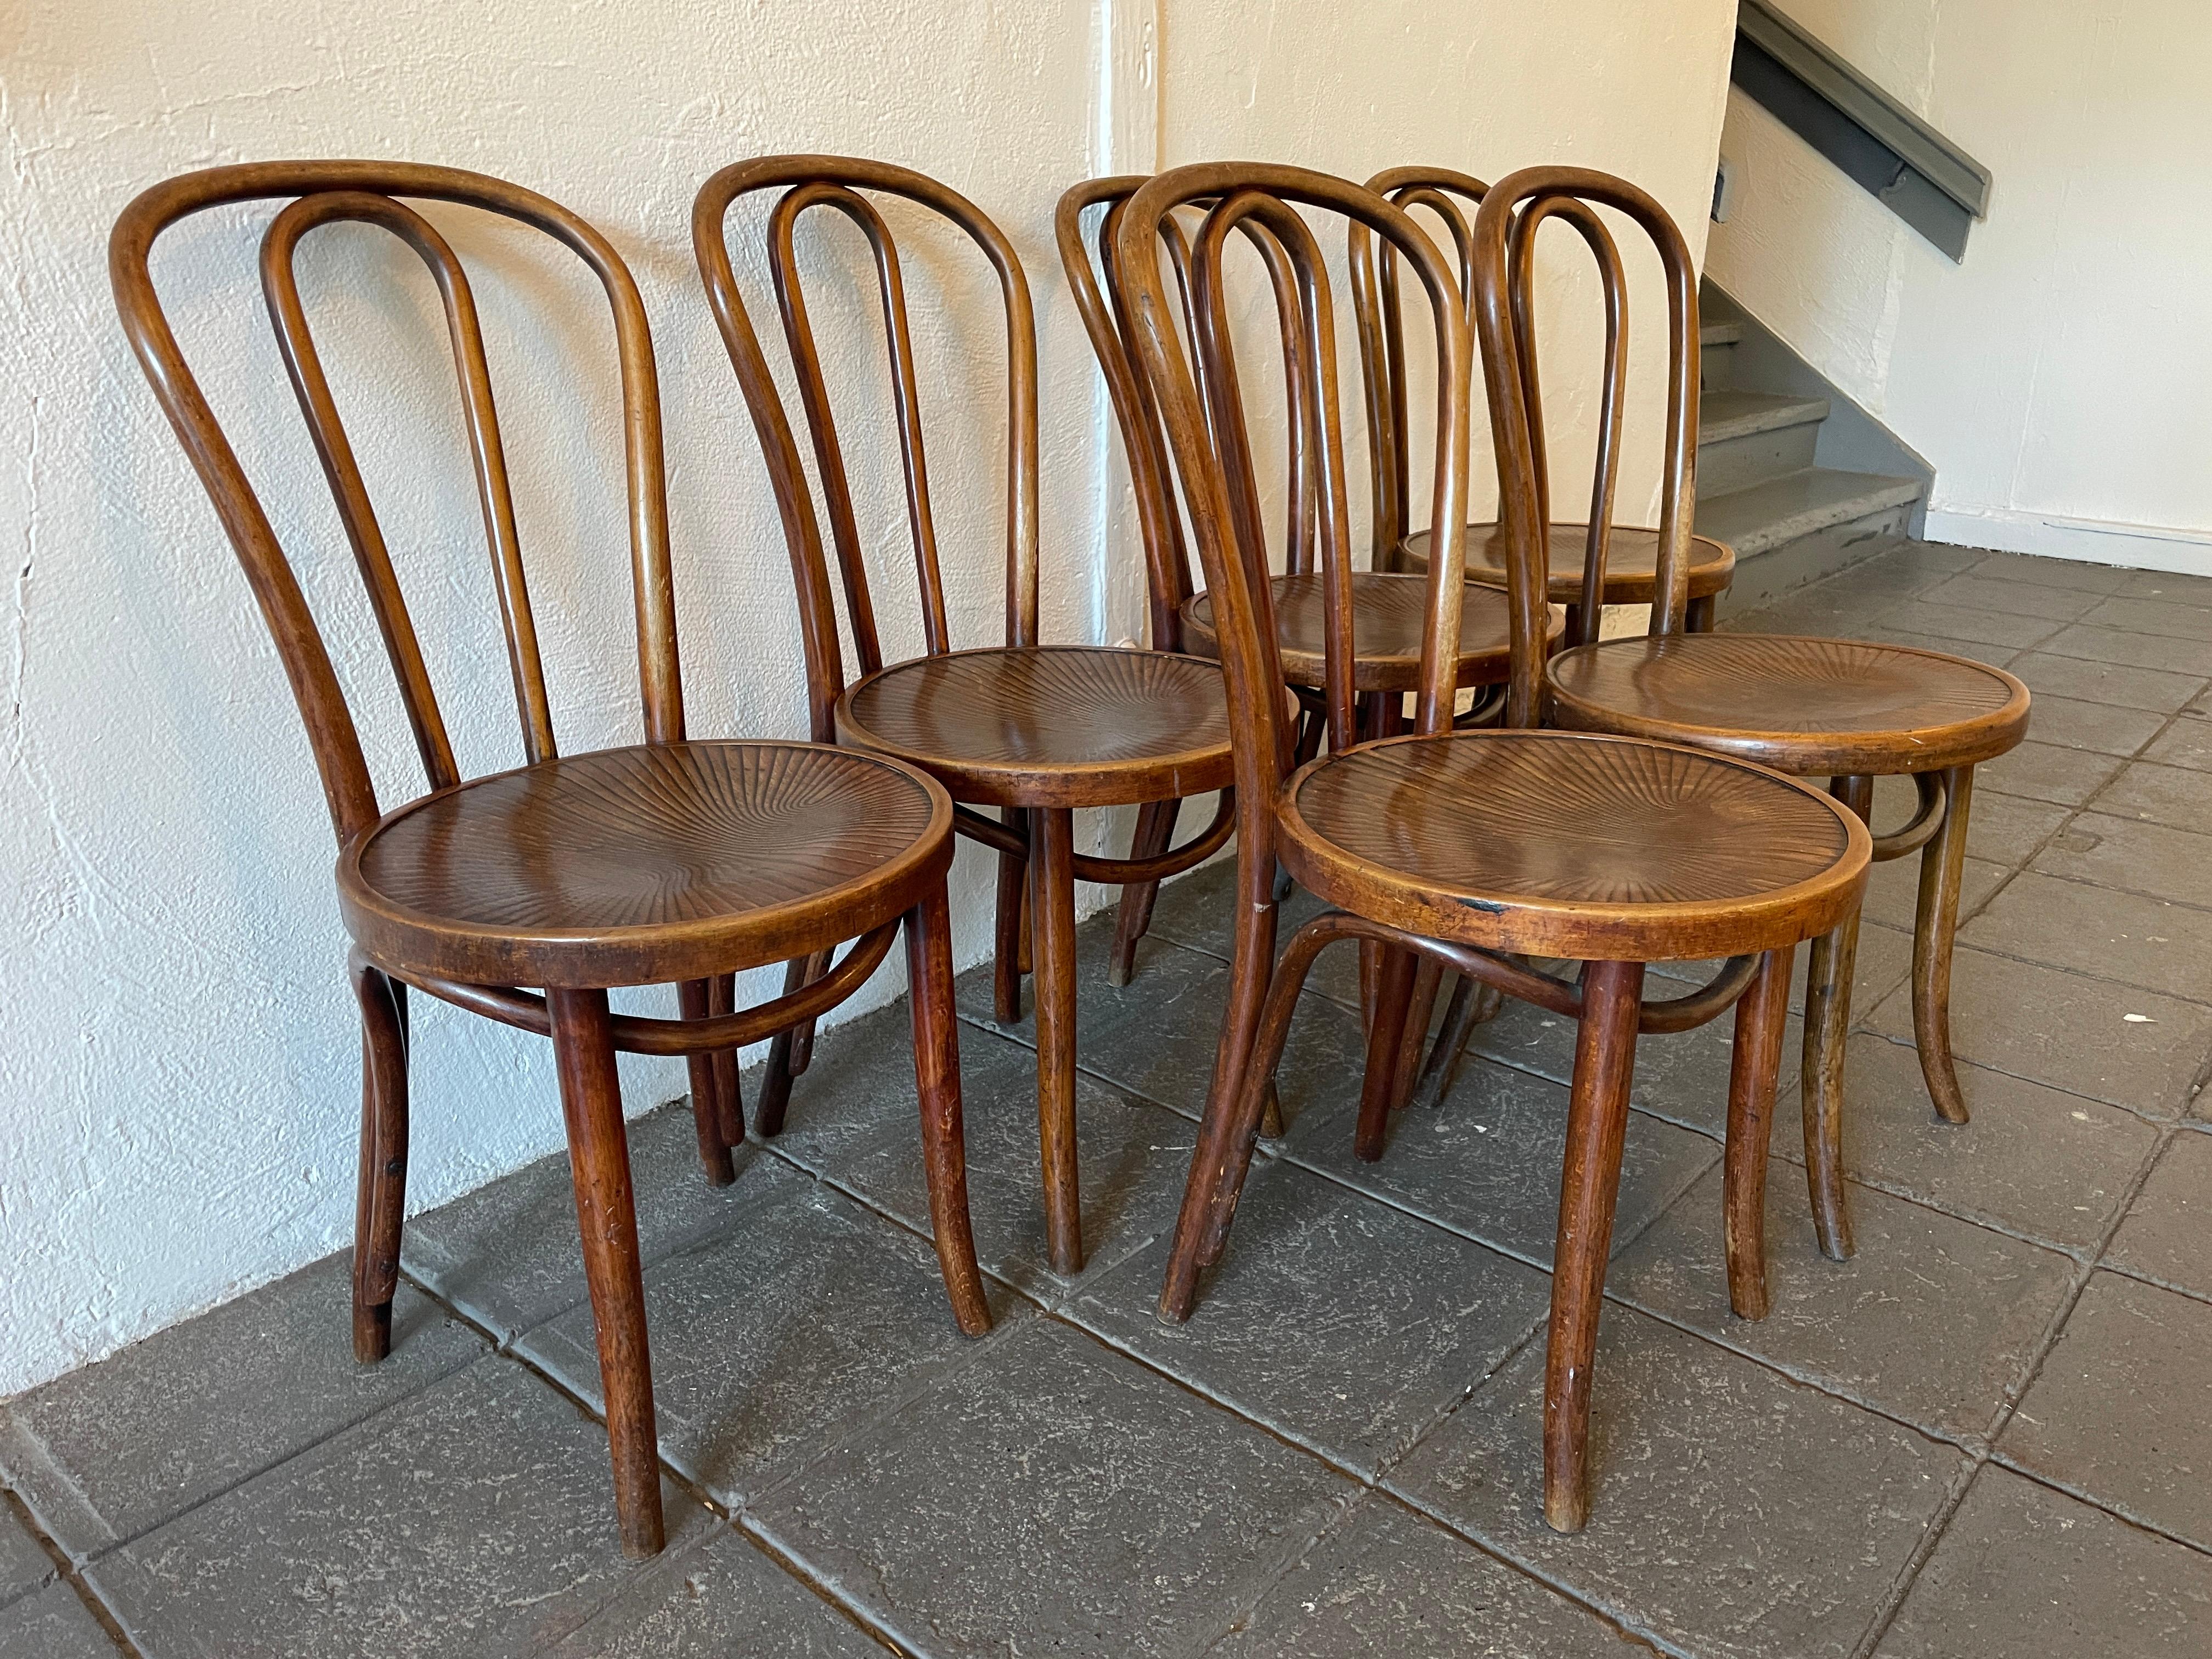 Mid century vintage thonet cafe chairs style number '18' - Set of matching 6 in original condition with amazing patina. The wood has been oiled showing honest wear and ready for use. Beautiful Patina wood grain on wood seats. Labeled - Made in